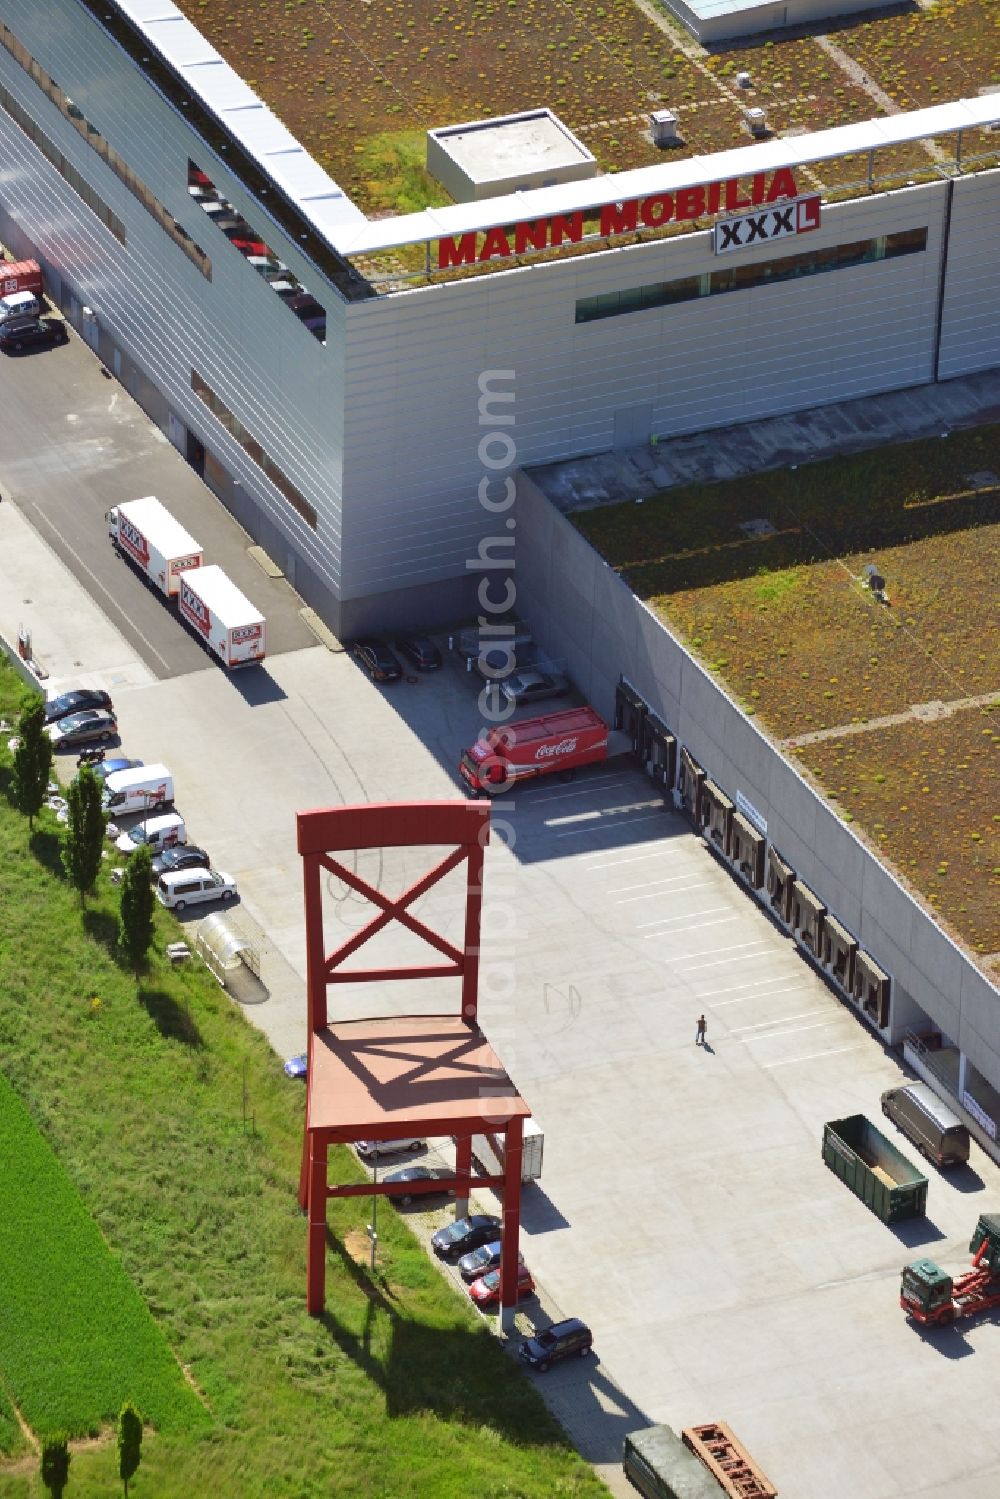 Aerial photograph Eschborn - The Mann Mobilia XXXL furniture store in Eschborn in the metropolitan area of Frankfurt am Main in the state of Hessen. View of the red chair, the trade mark of the XXXL furniture store chain